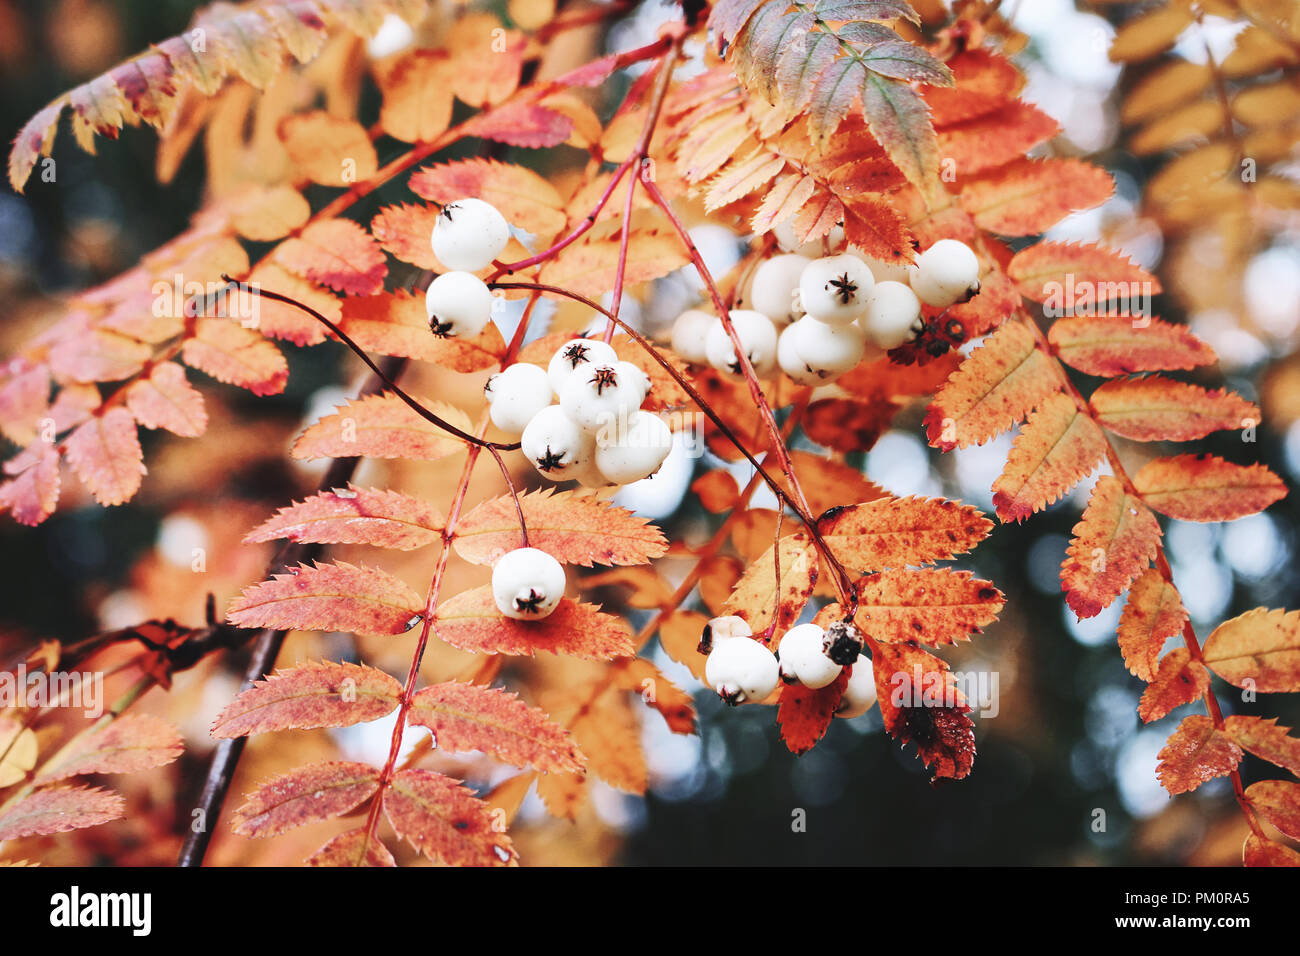 Closeup of autumn red colored leaves and white berries of Chinese rowan tree, Sorbus koehneana in nature. Selective focus. Stock Photo